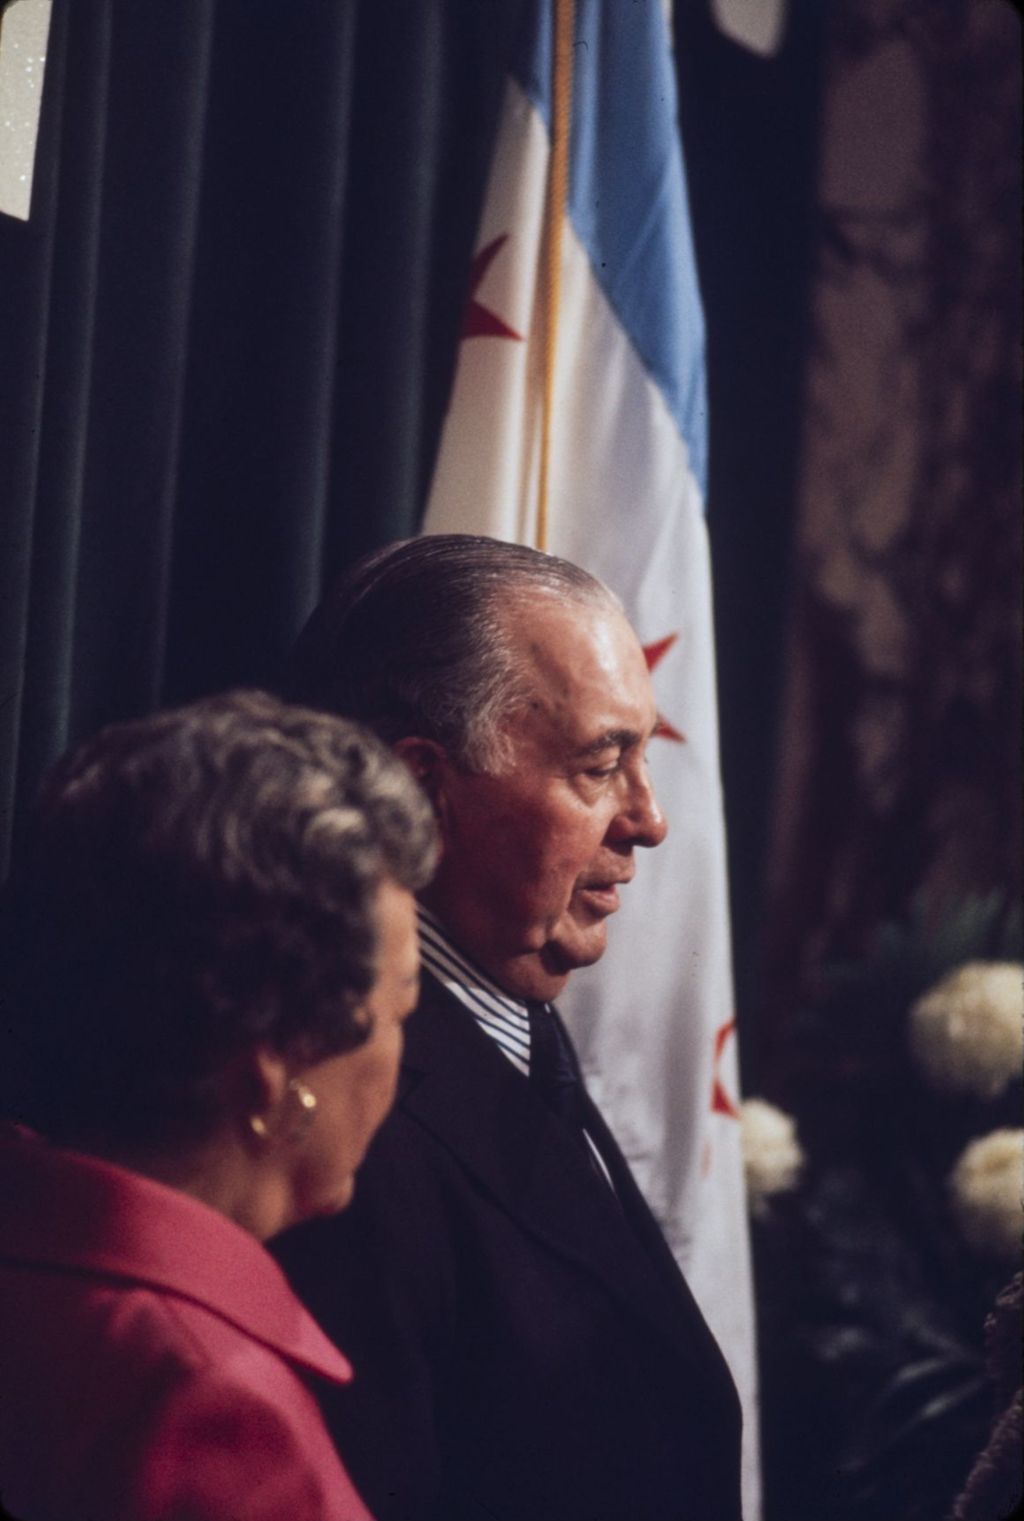 Miniature of Eleanor and Richard J. Daley at City Hall